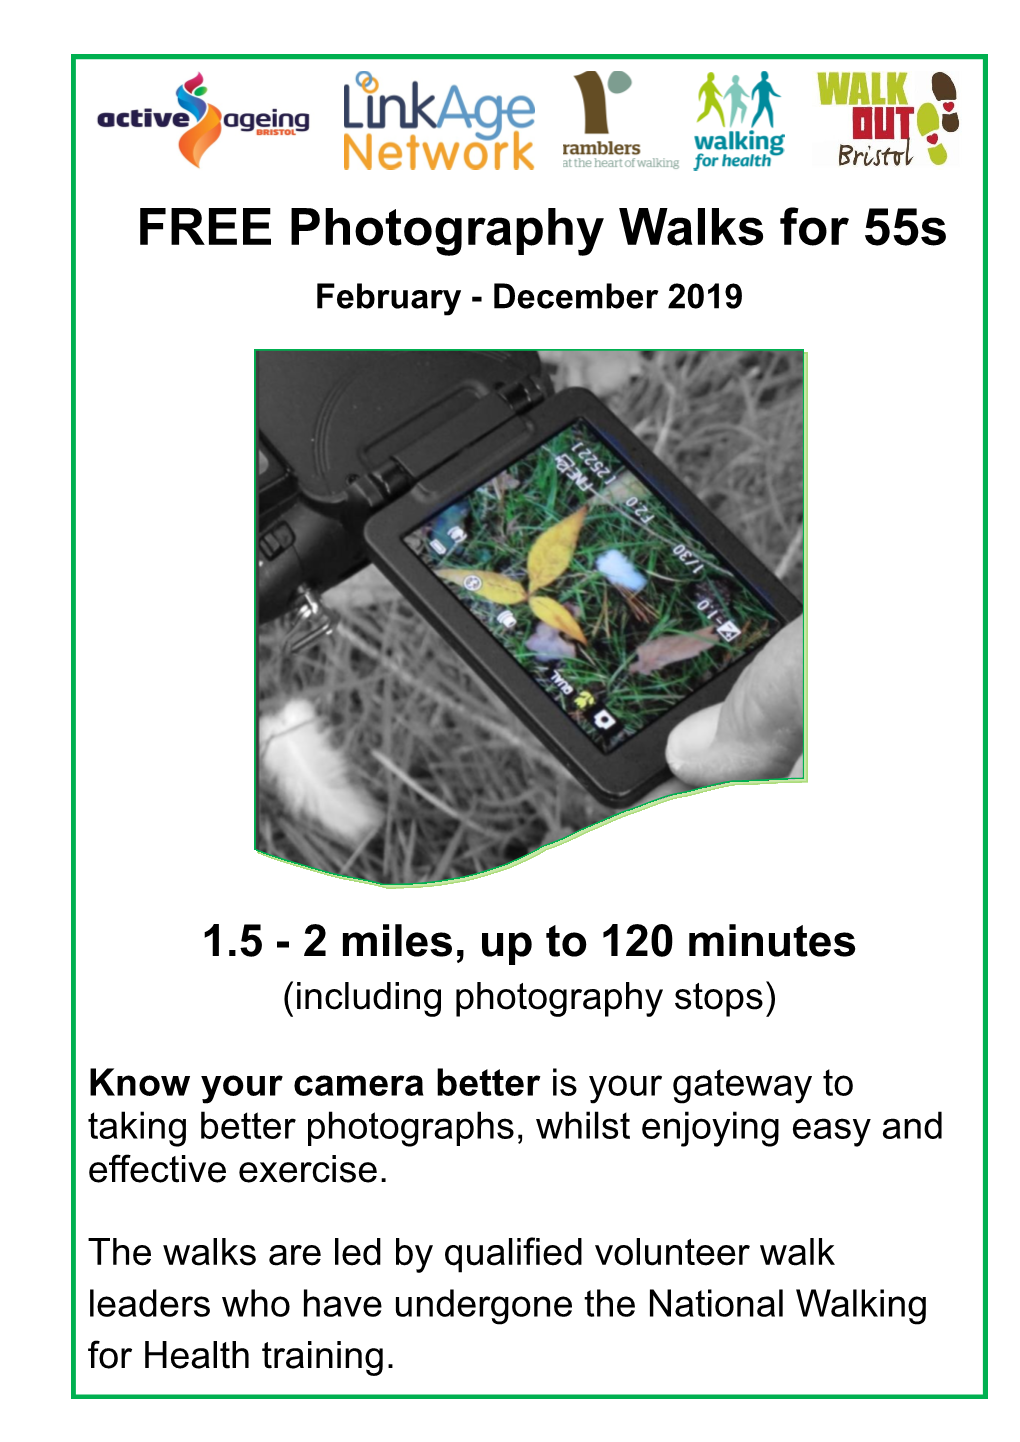 FREE Photography Walks for 55S February - December 2019